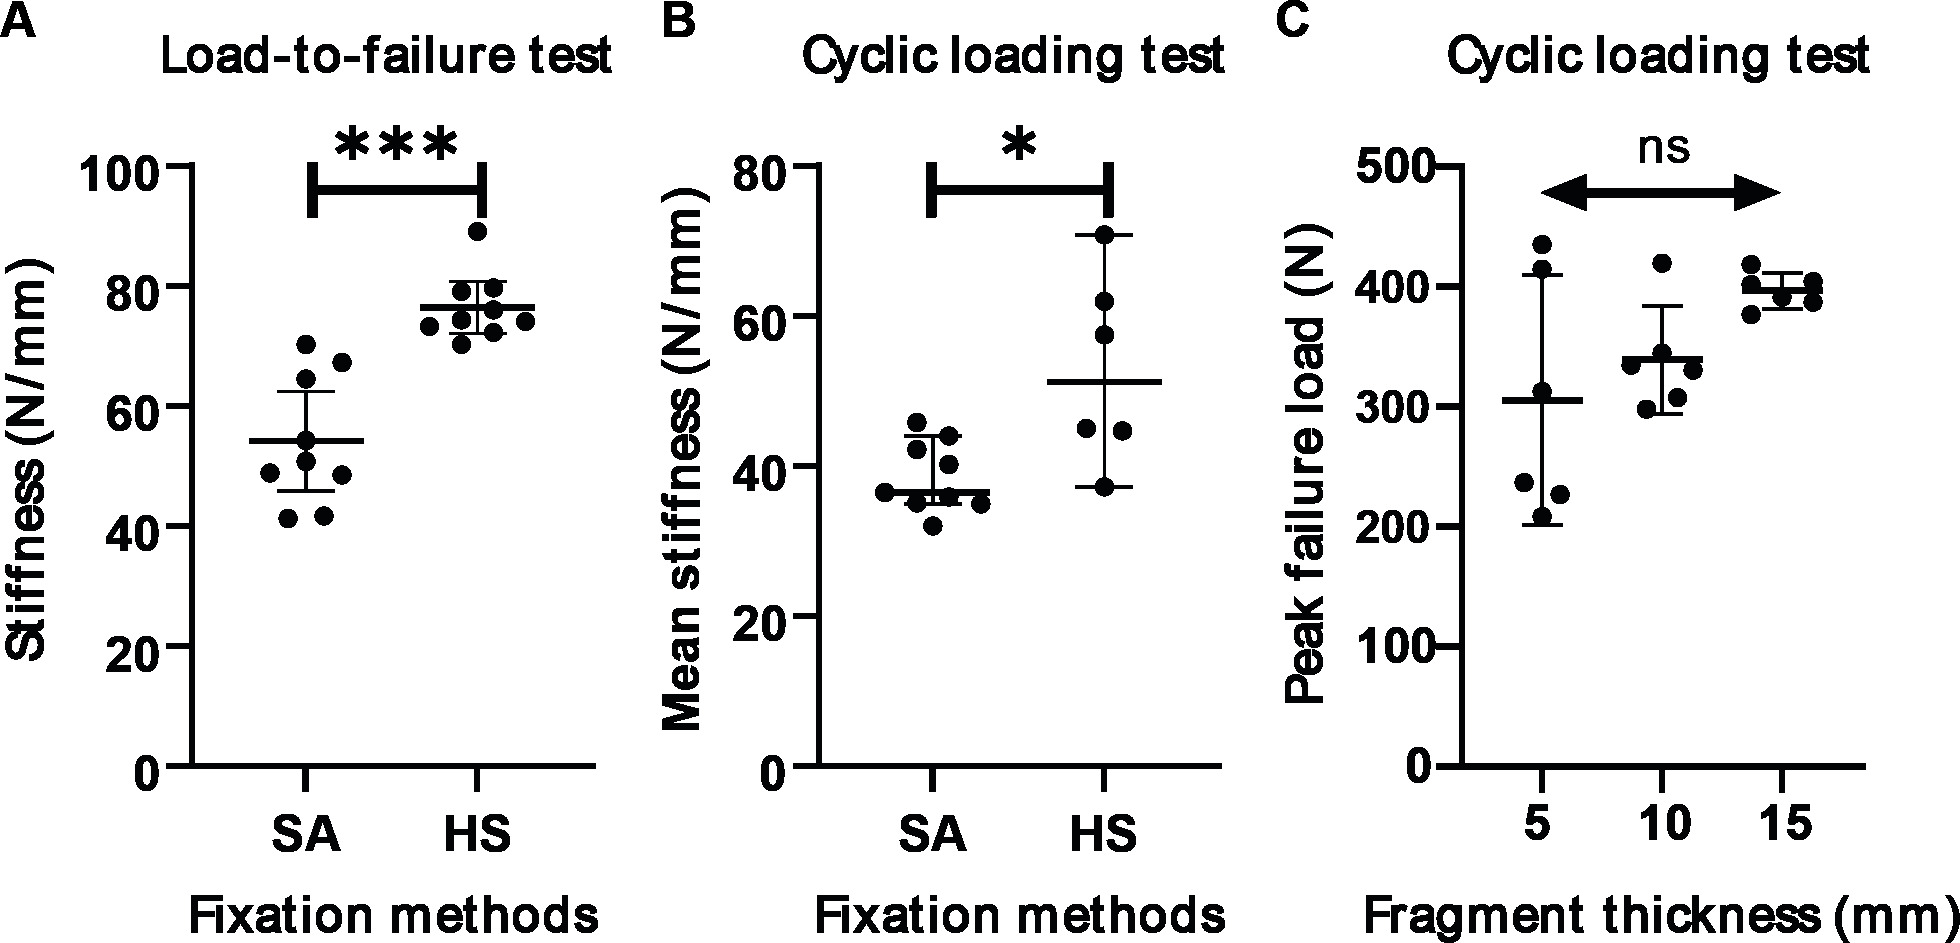 Fig. 2 
          a) Mean and 95% confidence intervals (CIs) of the stiffness of different fixation methods in the load-to-failure test, and the significant difference between the suture anchors and headless screw fixation. b) The median of the mean stiffness of cyclic loading tests and 95% CIs of the two fixation methods and the significant difference is noted. c) Mean and 95% CIs of the peak failure load of cyclic loading test of different fragment thicknesses, with no significant difference noted among the groups (p = 0.070). ns, p > 0.05, one-way ANOVA; *p < 0.05, Mann-Whitney U test; ***p < 0.001, independent-samples t-test. ns, non-significant.
        